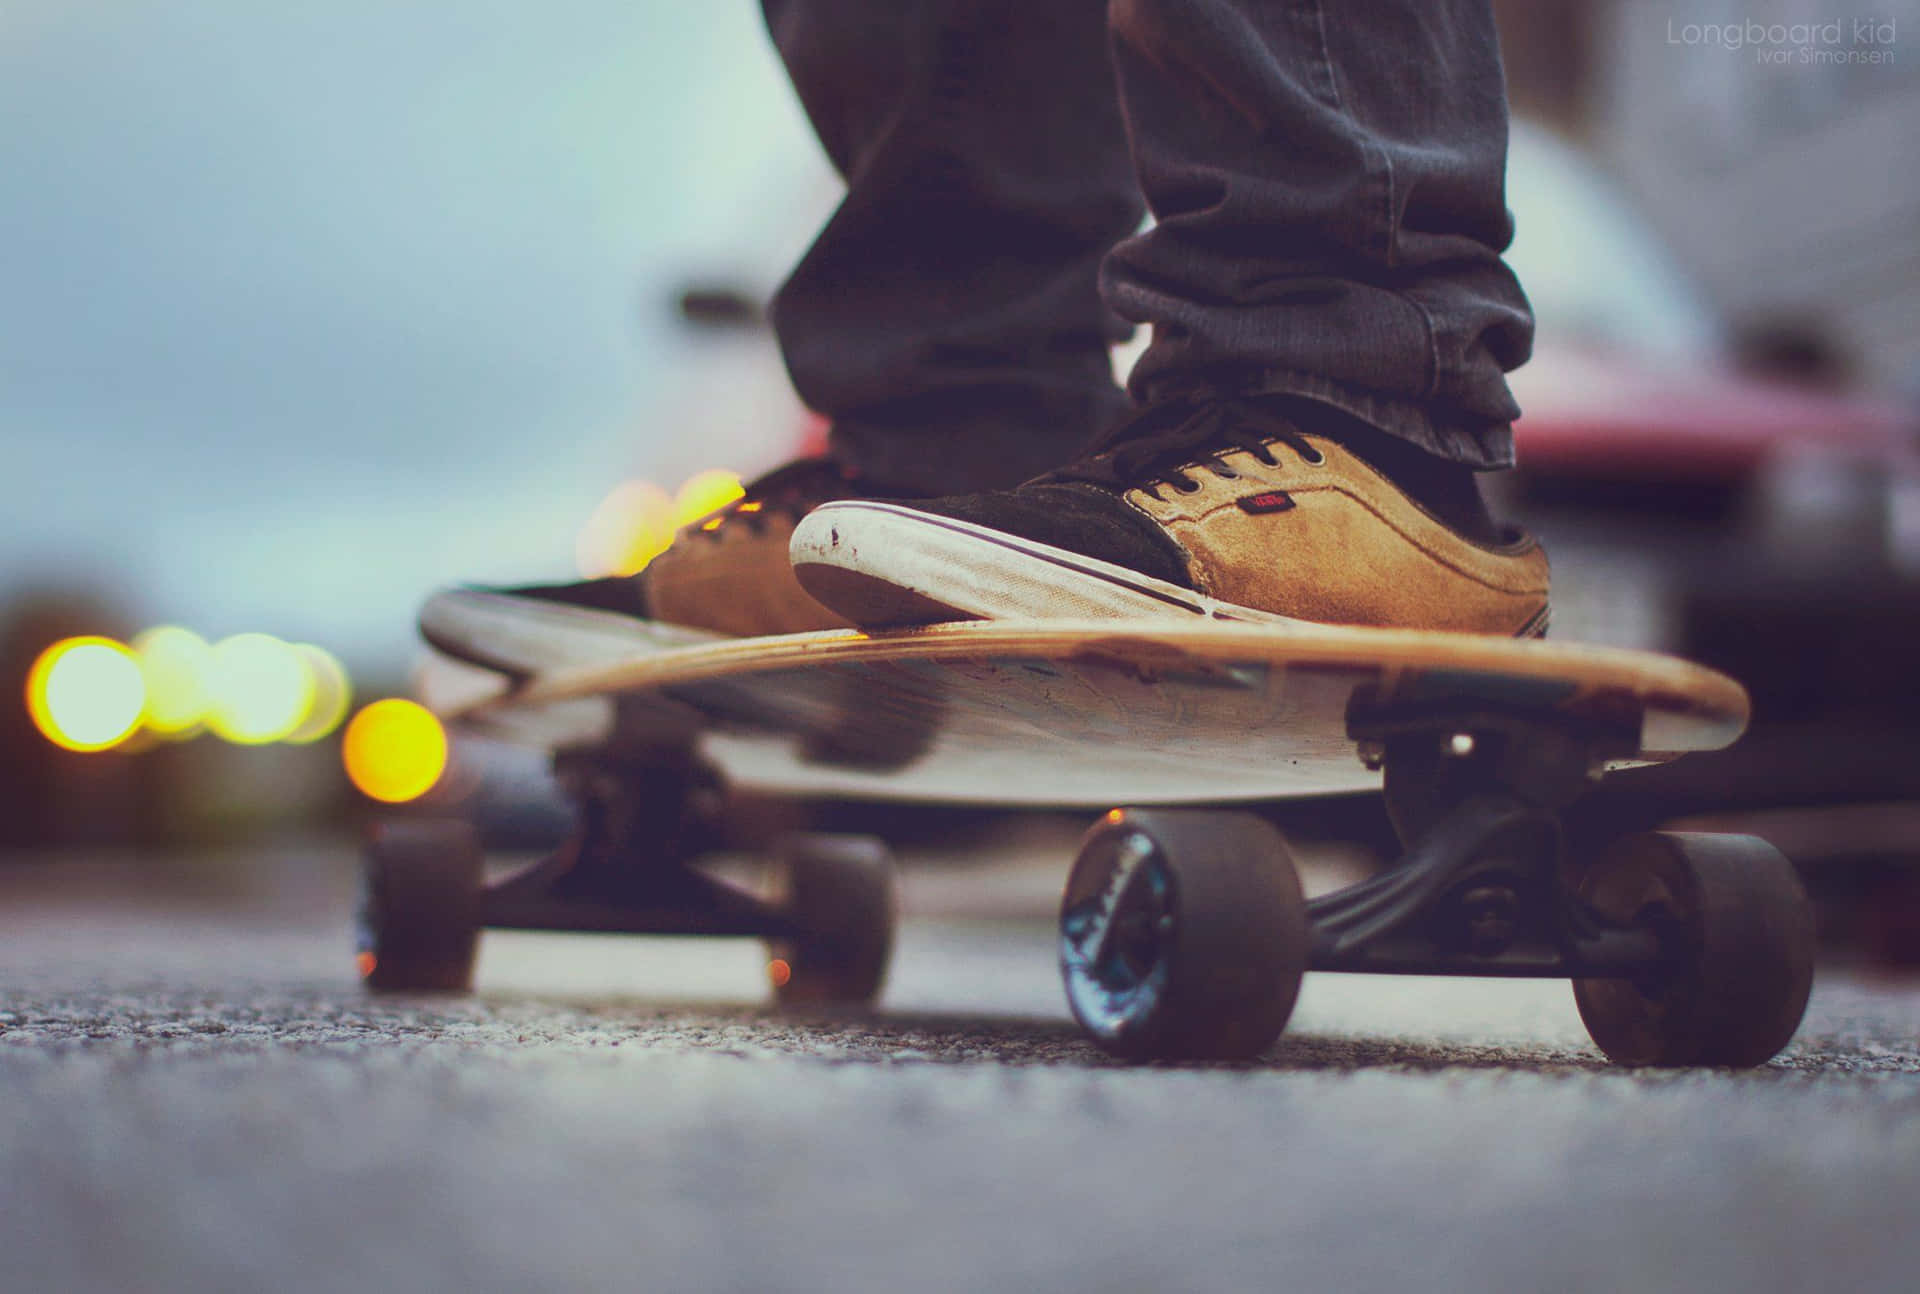 Cruise along the boardwalk with this classic retro skateboard. Wallpaper